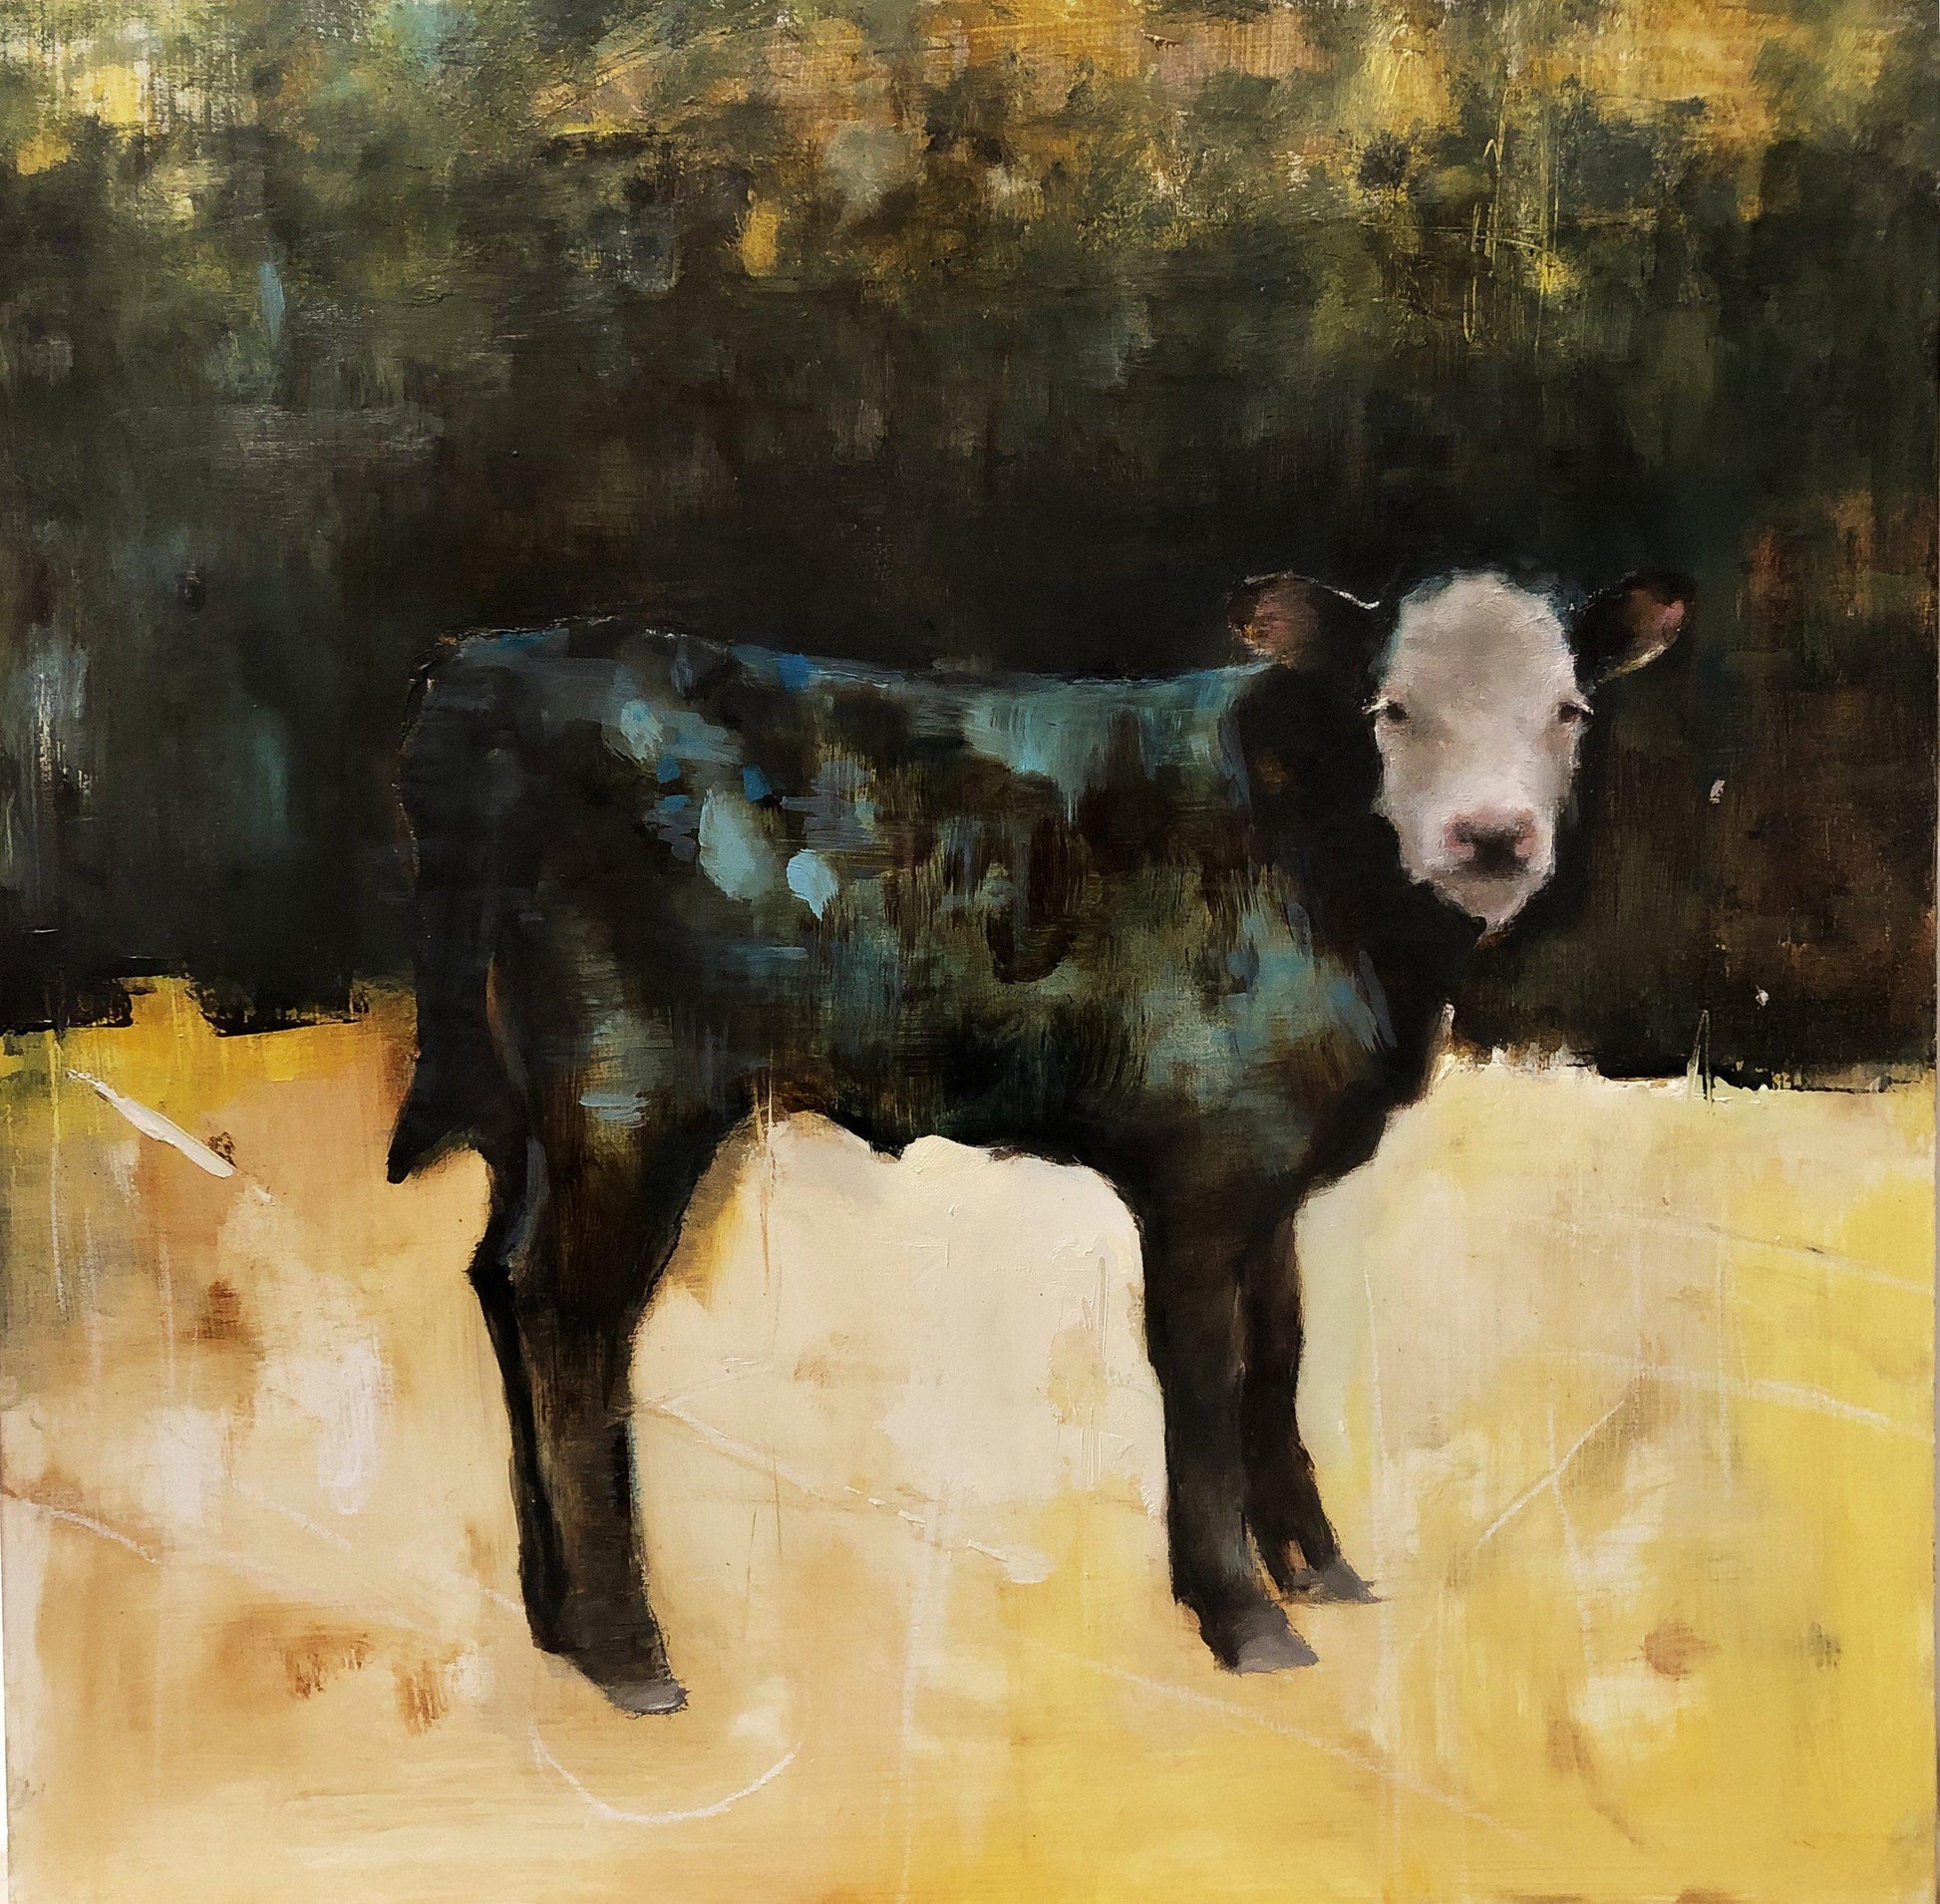 Calf Portrait. Black Calf, white face with accents of blue and green jewel colors. Contemporary western painting.